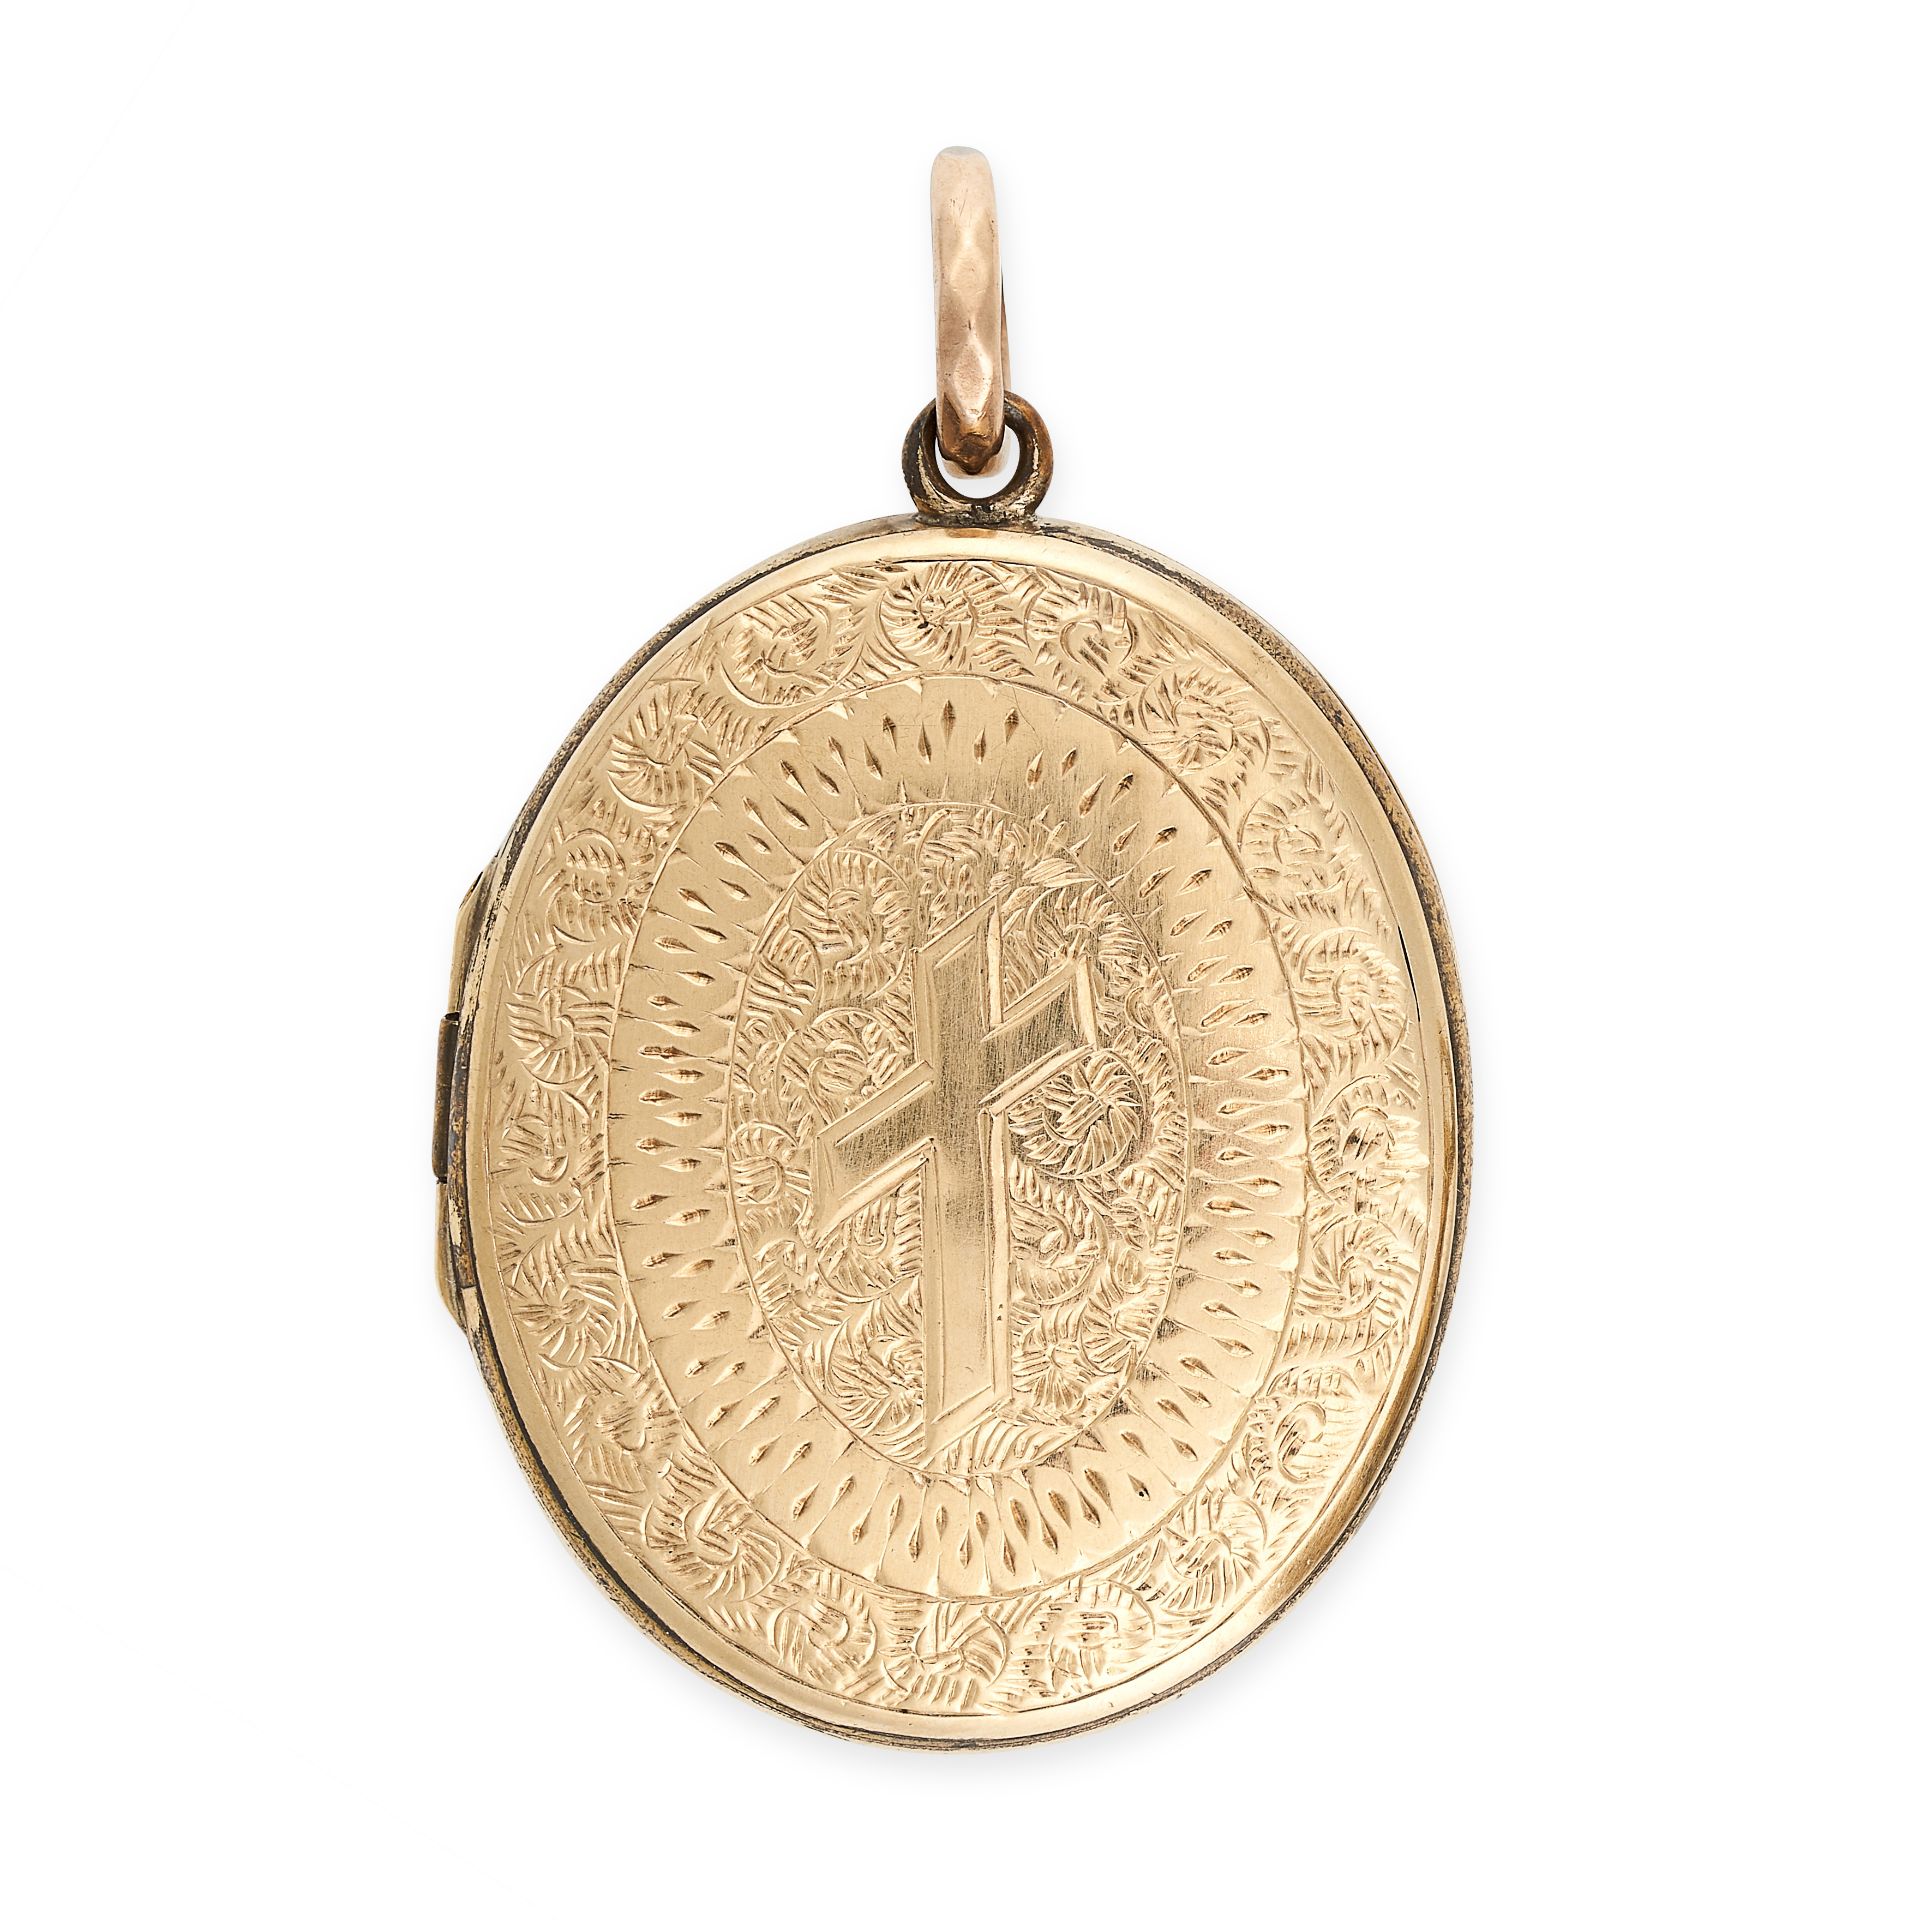 AN ANTIQUE HAIRWORK MOURNING LOCKET PENDANT the hinged oval body with engraved decoration to the